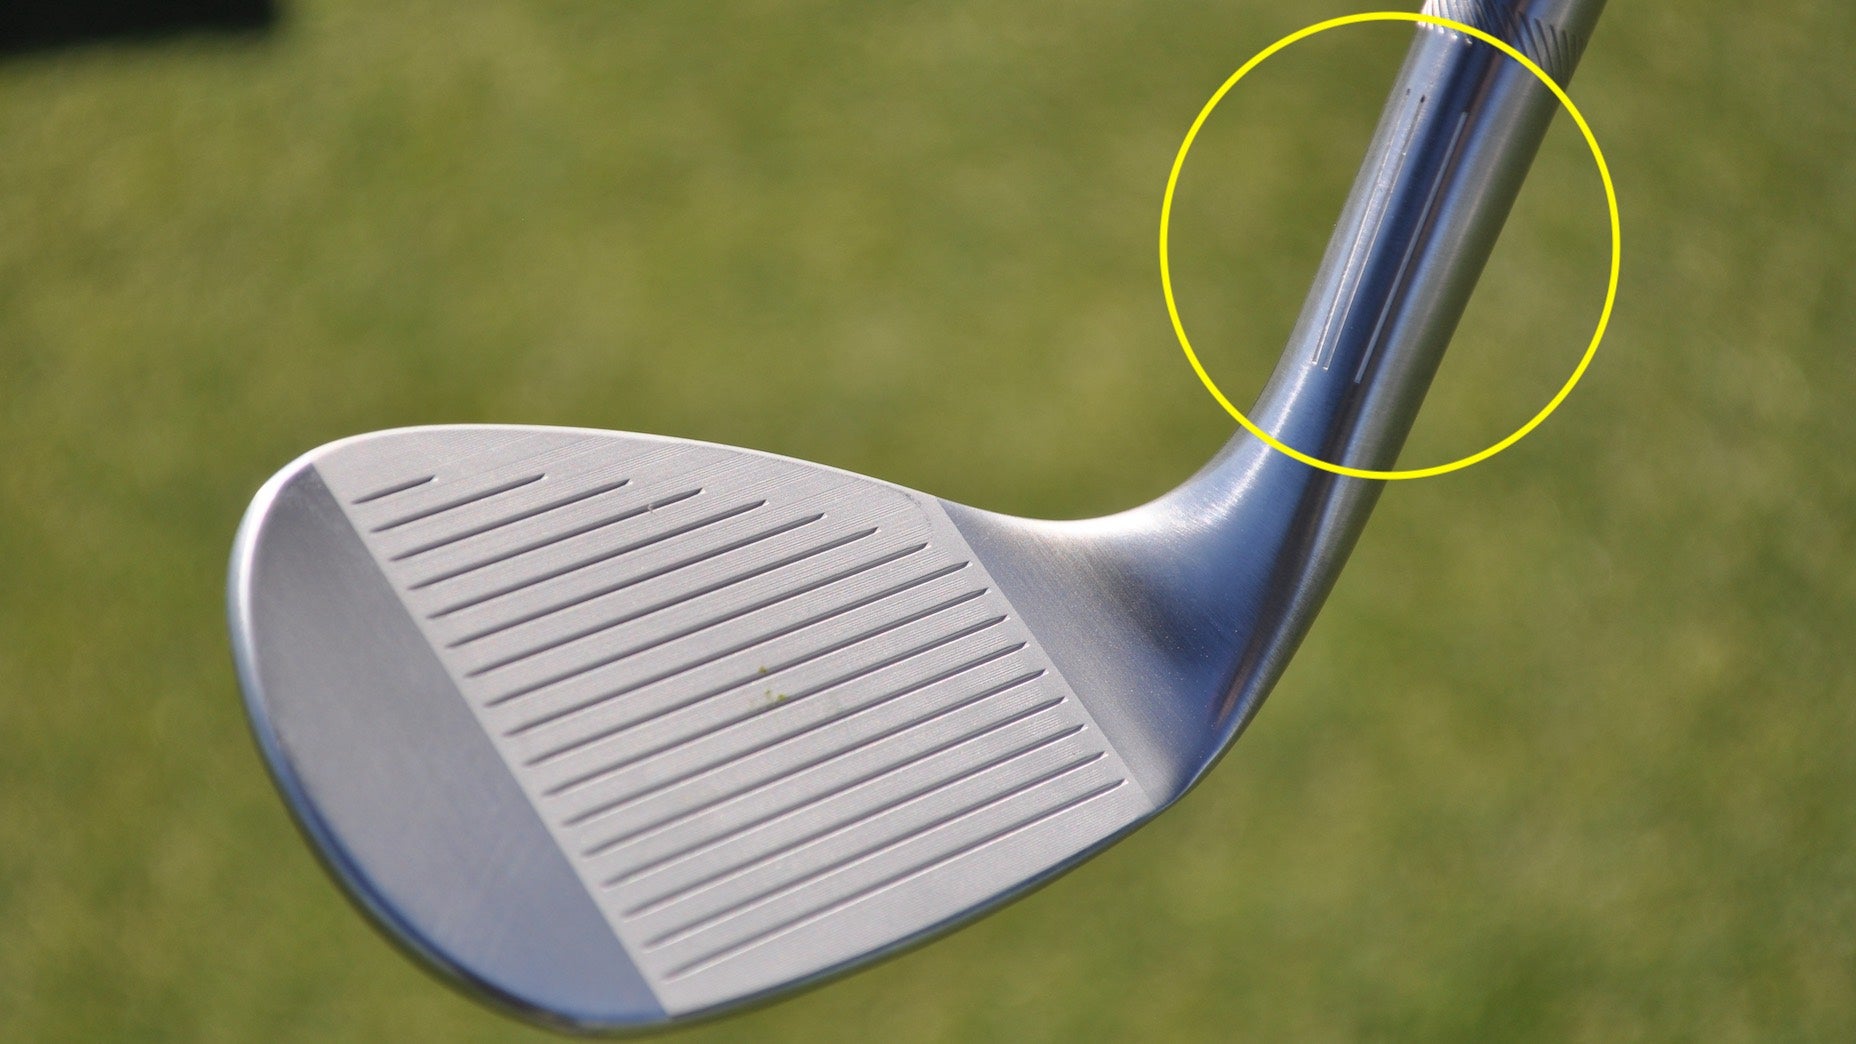 This ingenious visual aid could revolutionize your wedge game